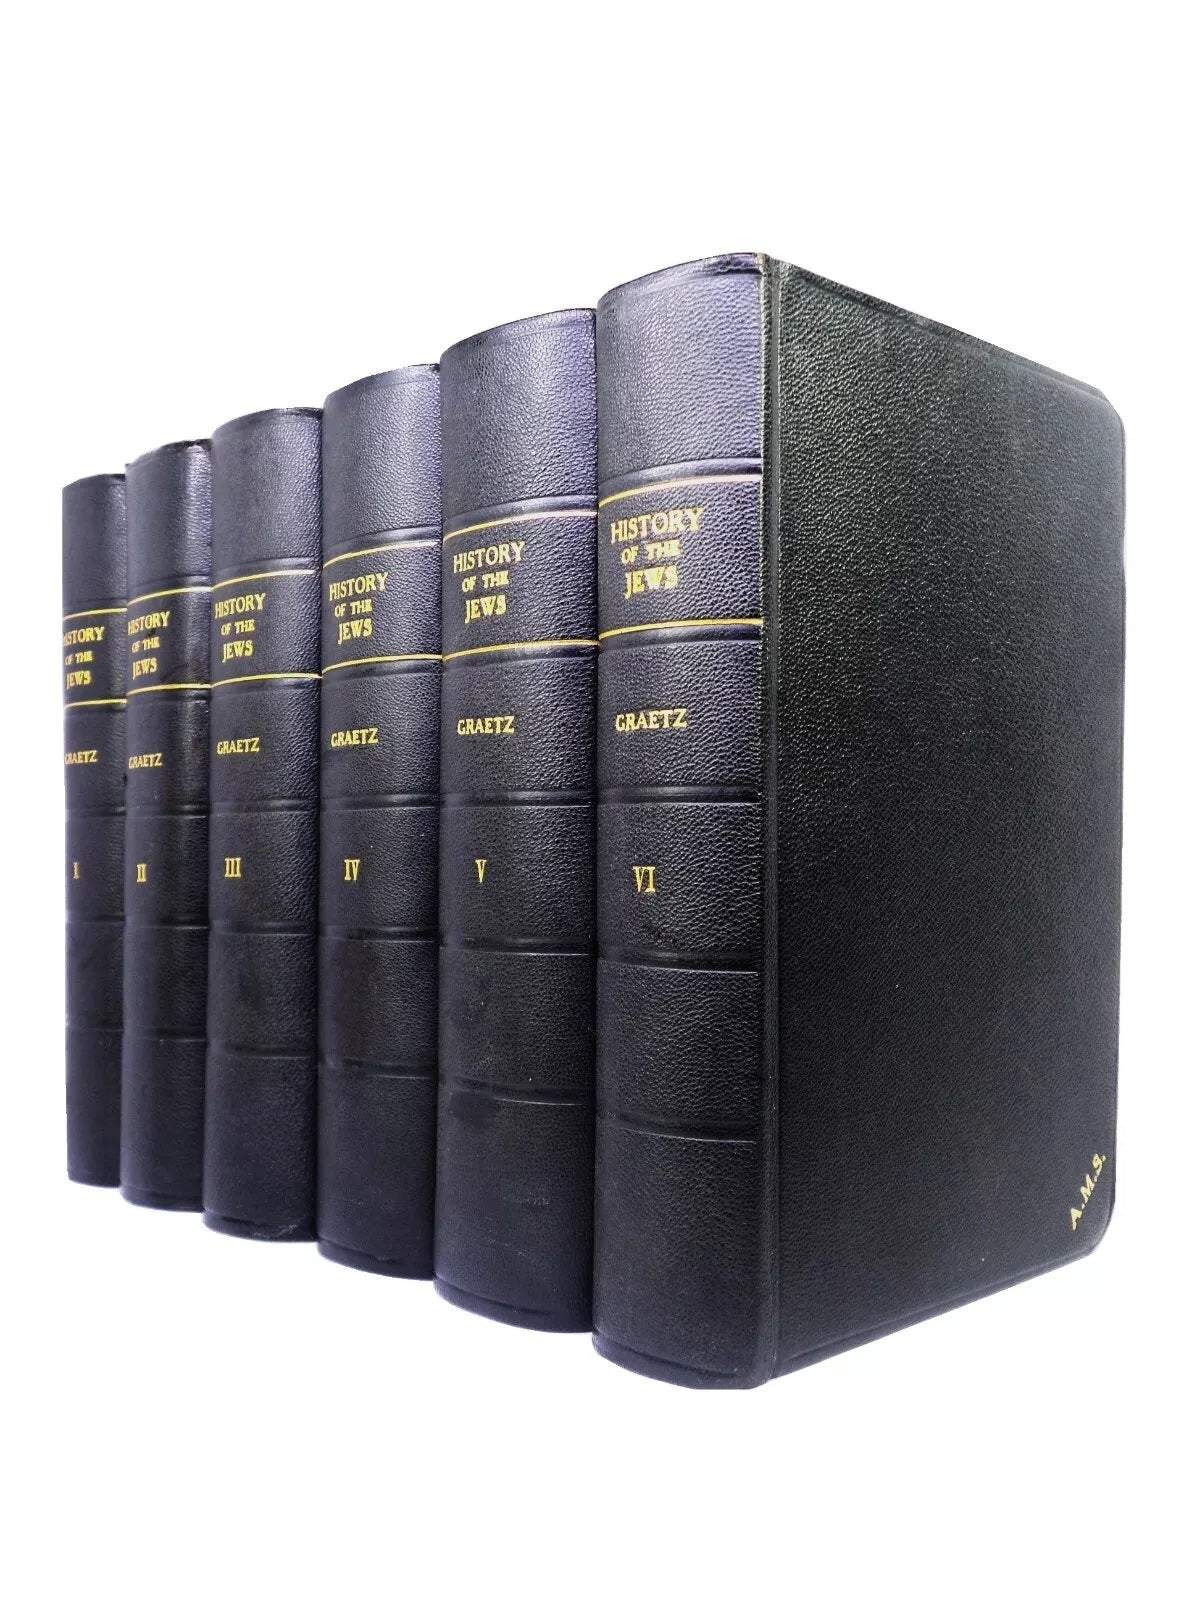 HISTORY OF THE JEWS BY HEINRICH GRAETZ 1956 LEATHER BOUND IN SIX VOLUMES